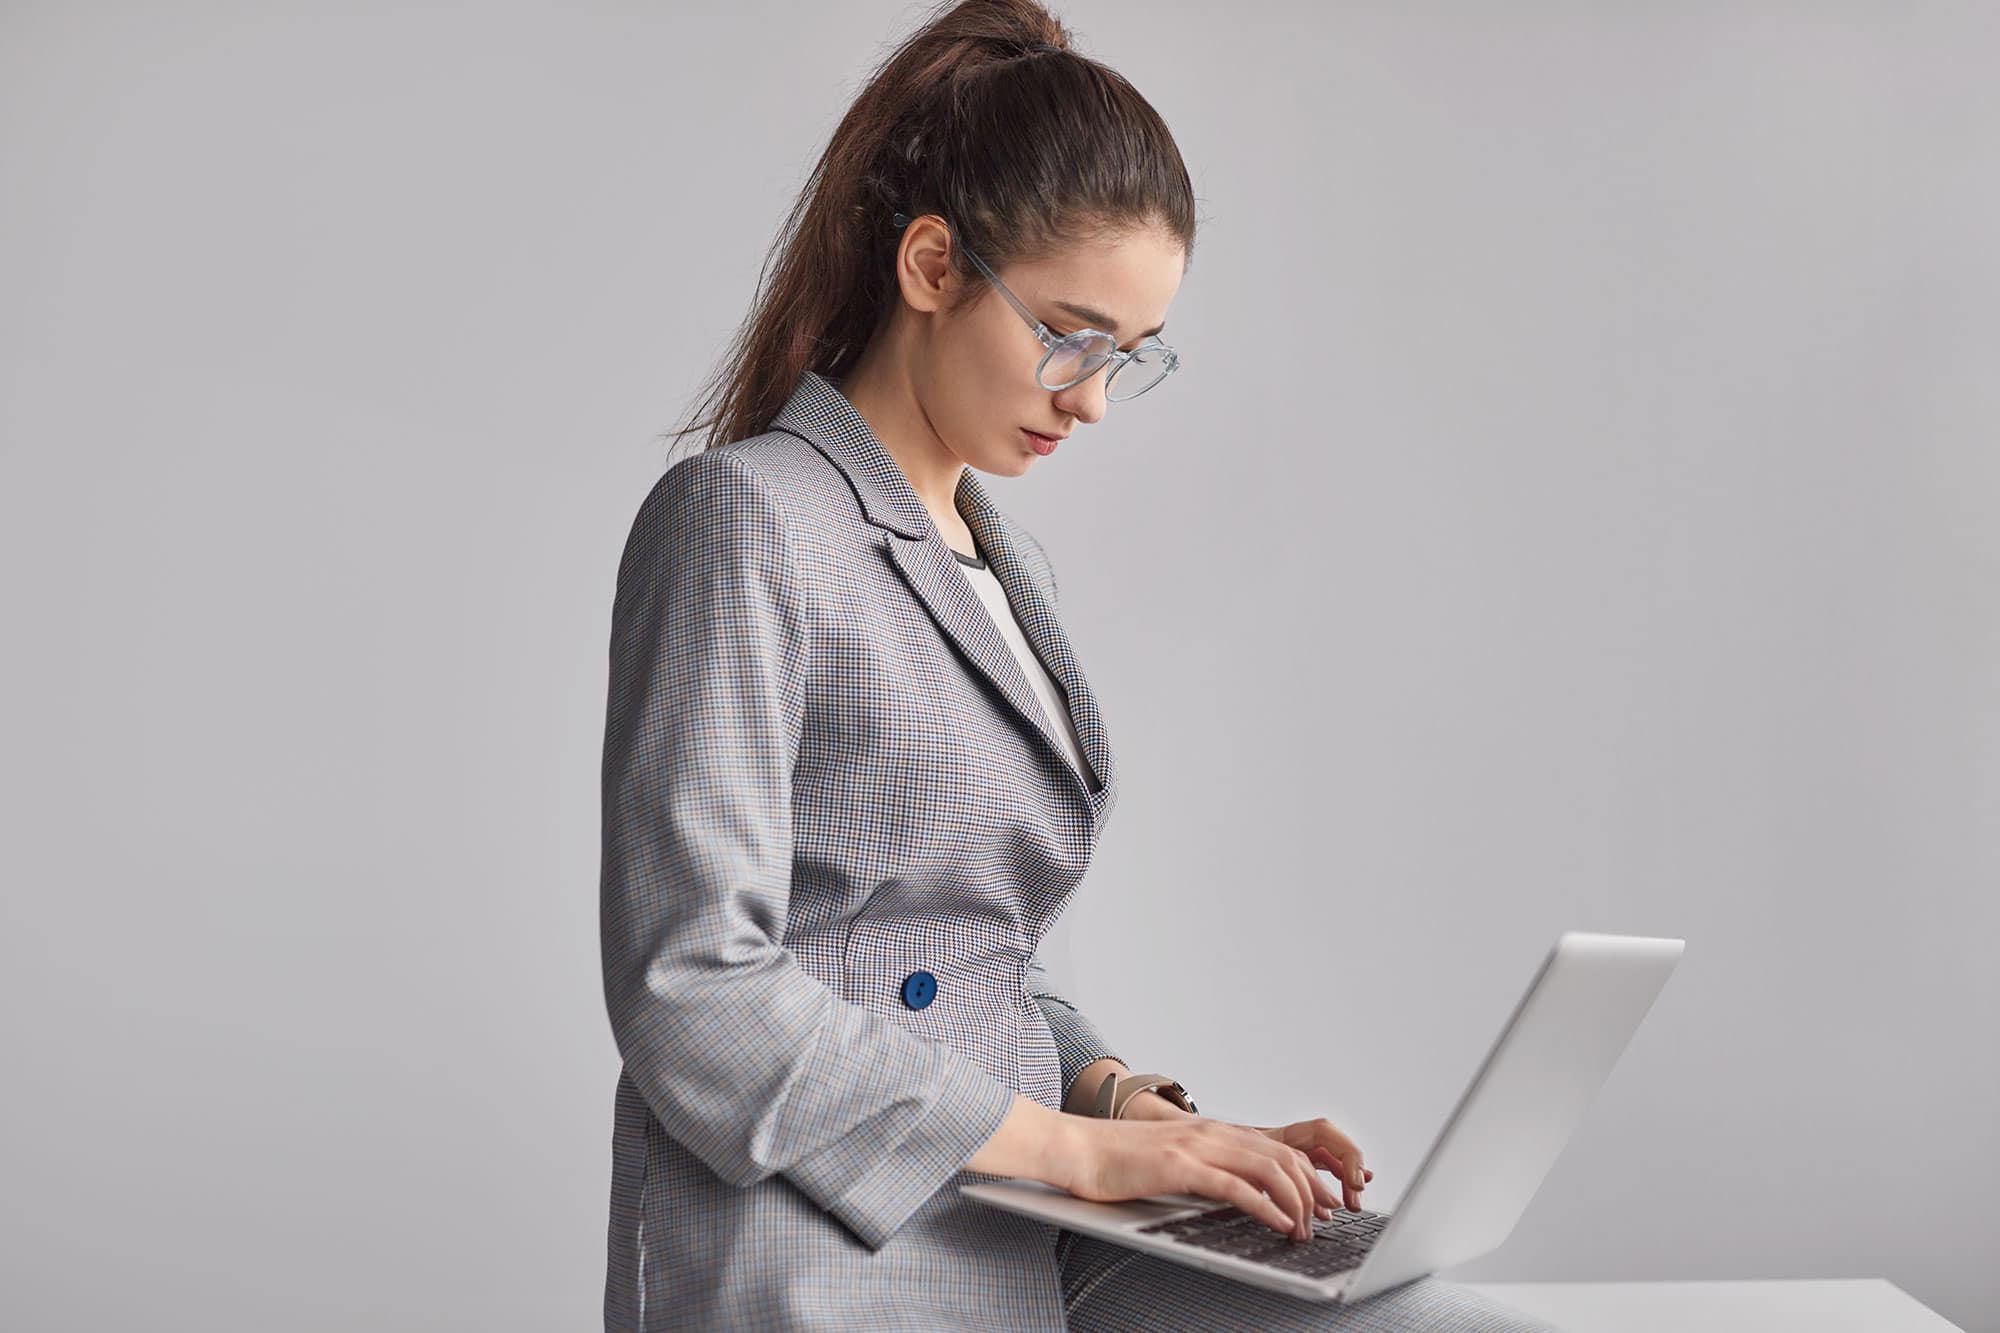 A woman in a business suit is using a laptop.